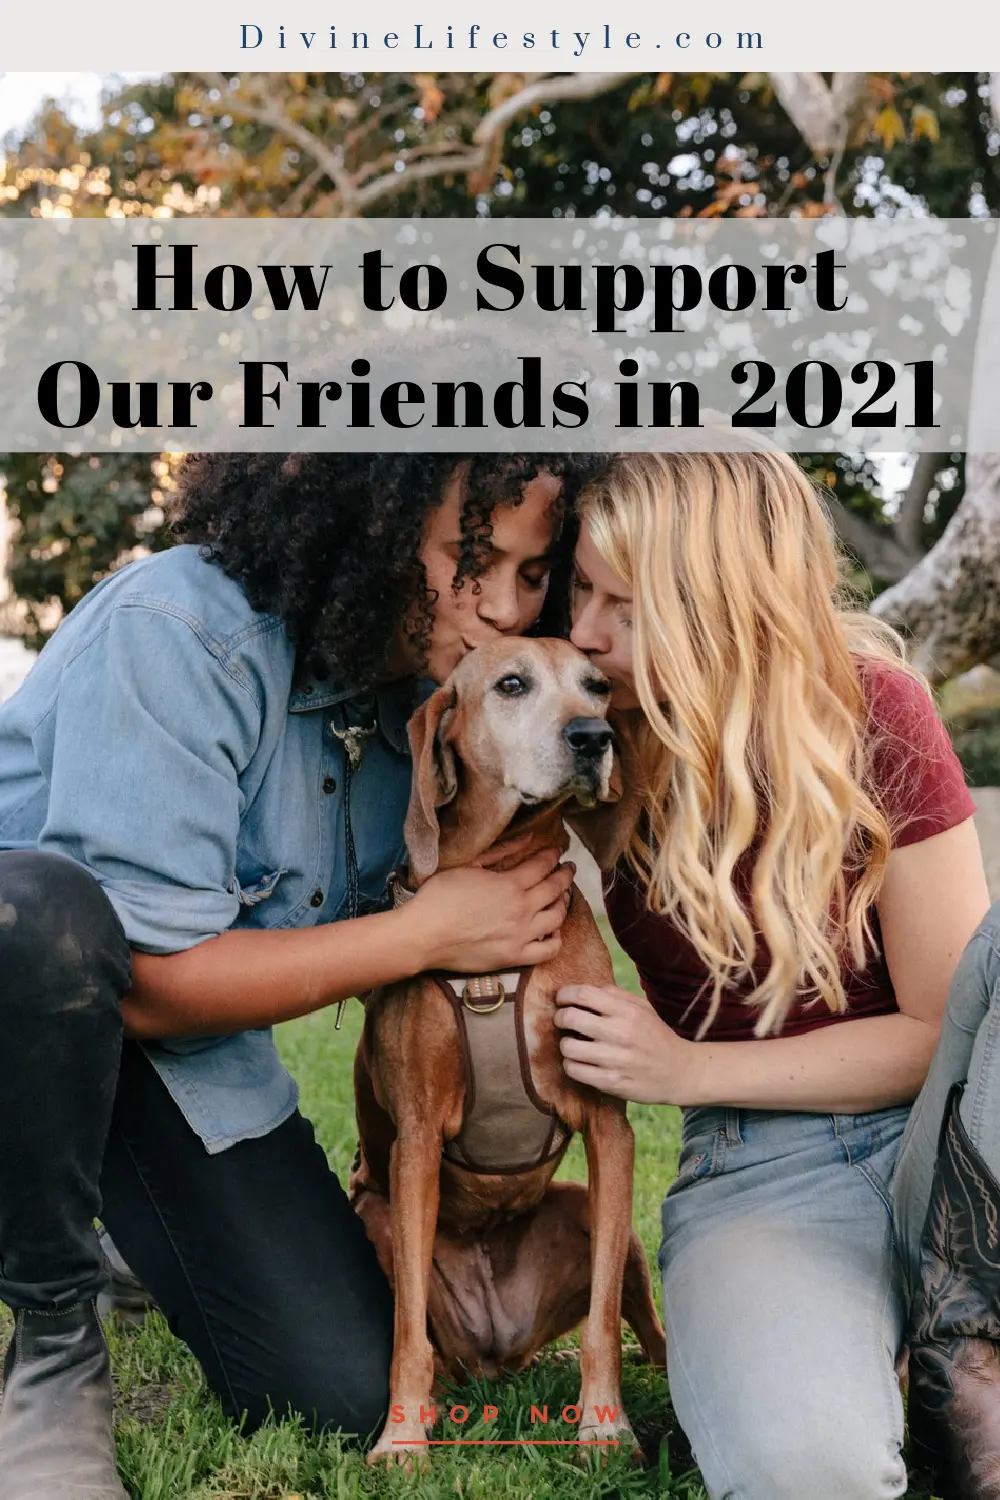 How to Support Our Friends in 2021